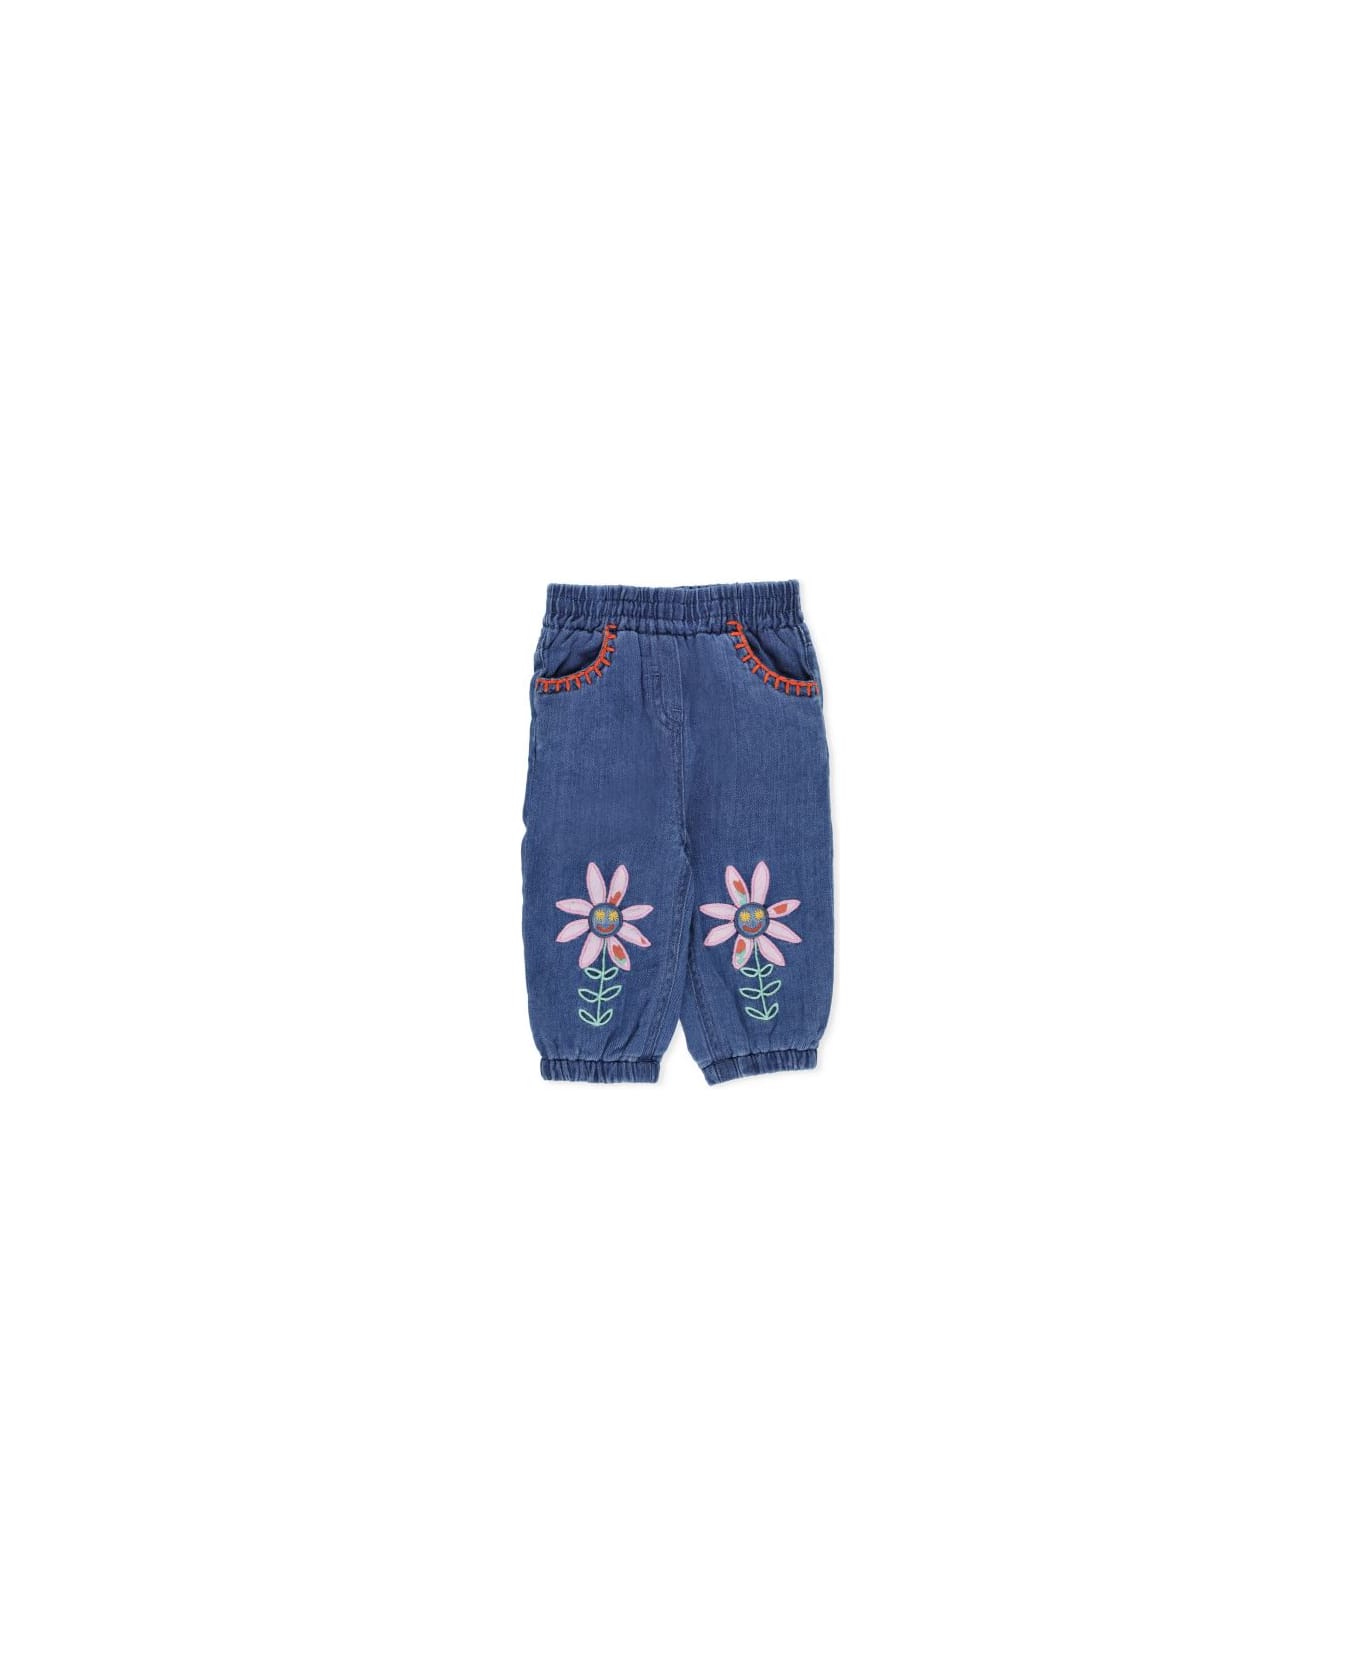 Stella McCartney Pants With Embroideries - DENIM